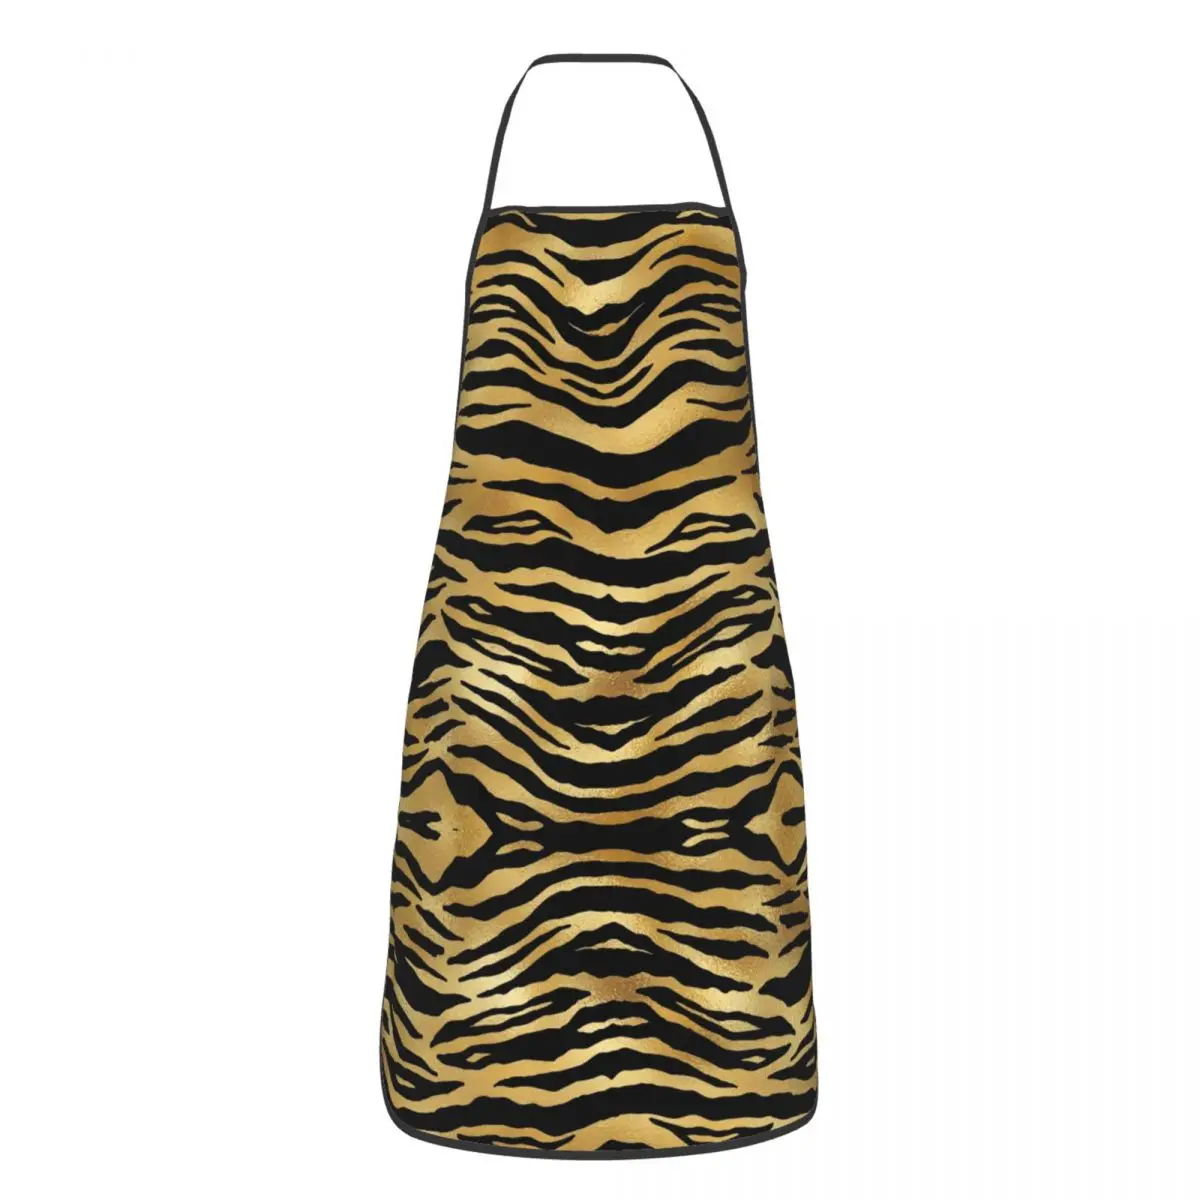 

Gold Tiger Stripes Animal Cuisine Grill Baking Aprons Anti-greasy Leopard Bib Tablier for Chef Barista BBQ Dinner Party